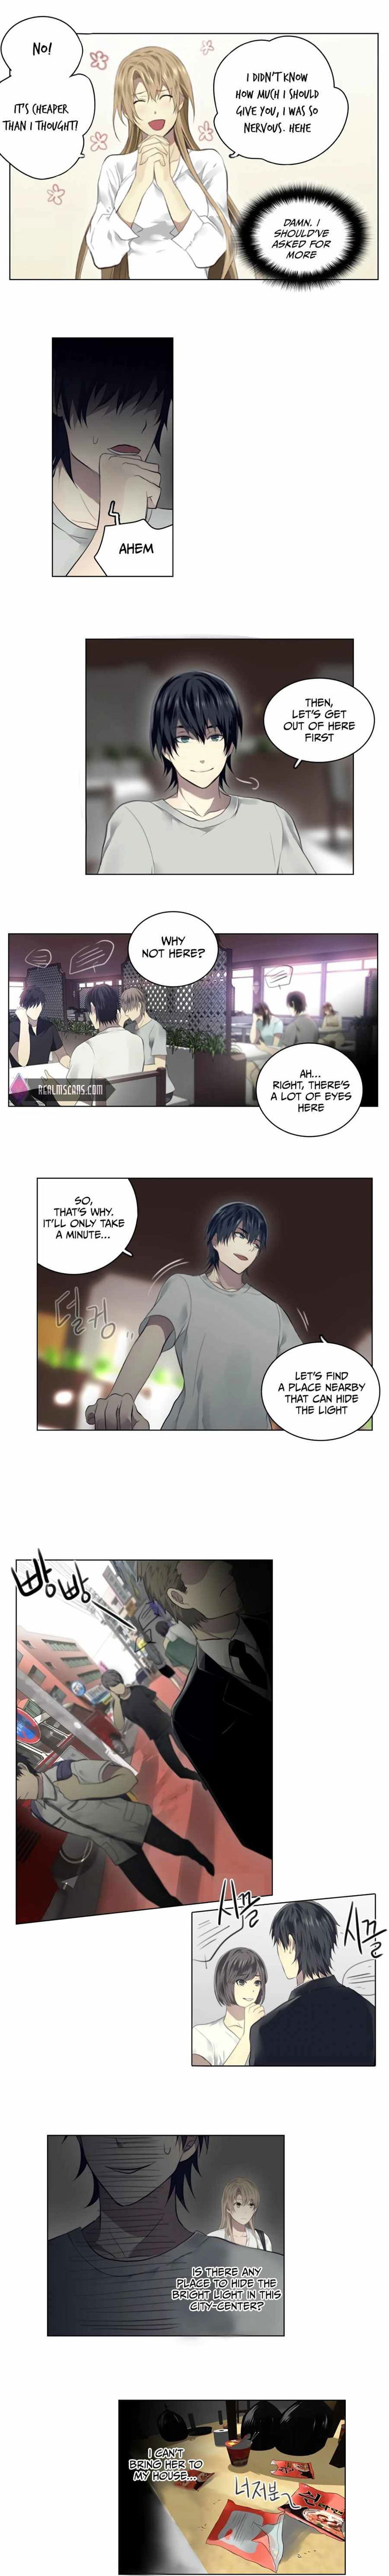 Gong Heon Ja Chapter 17 page 6